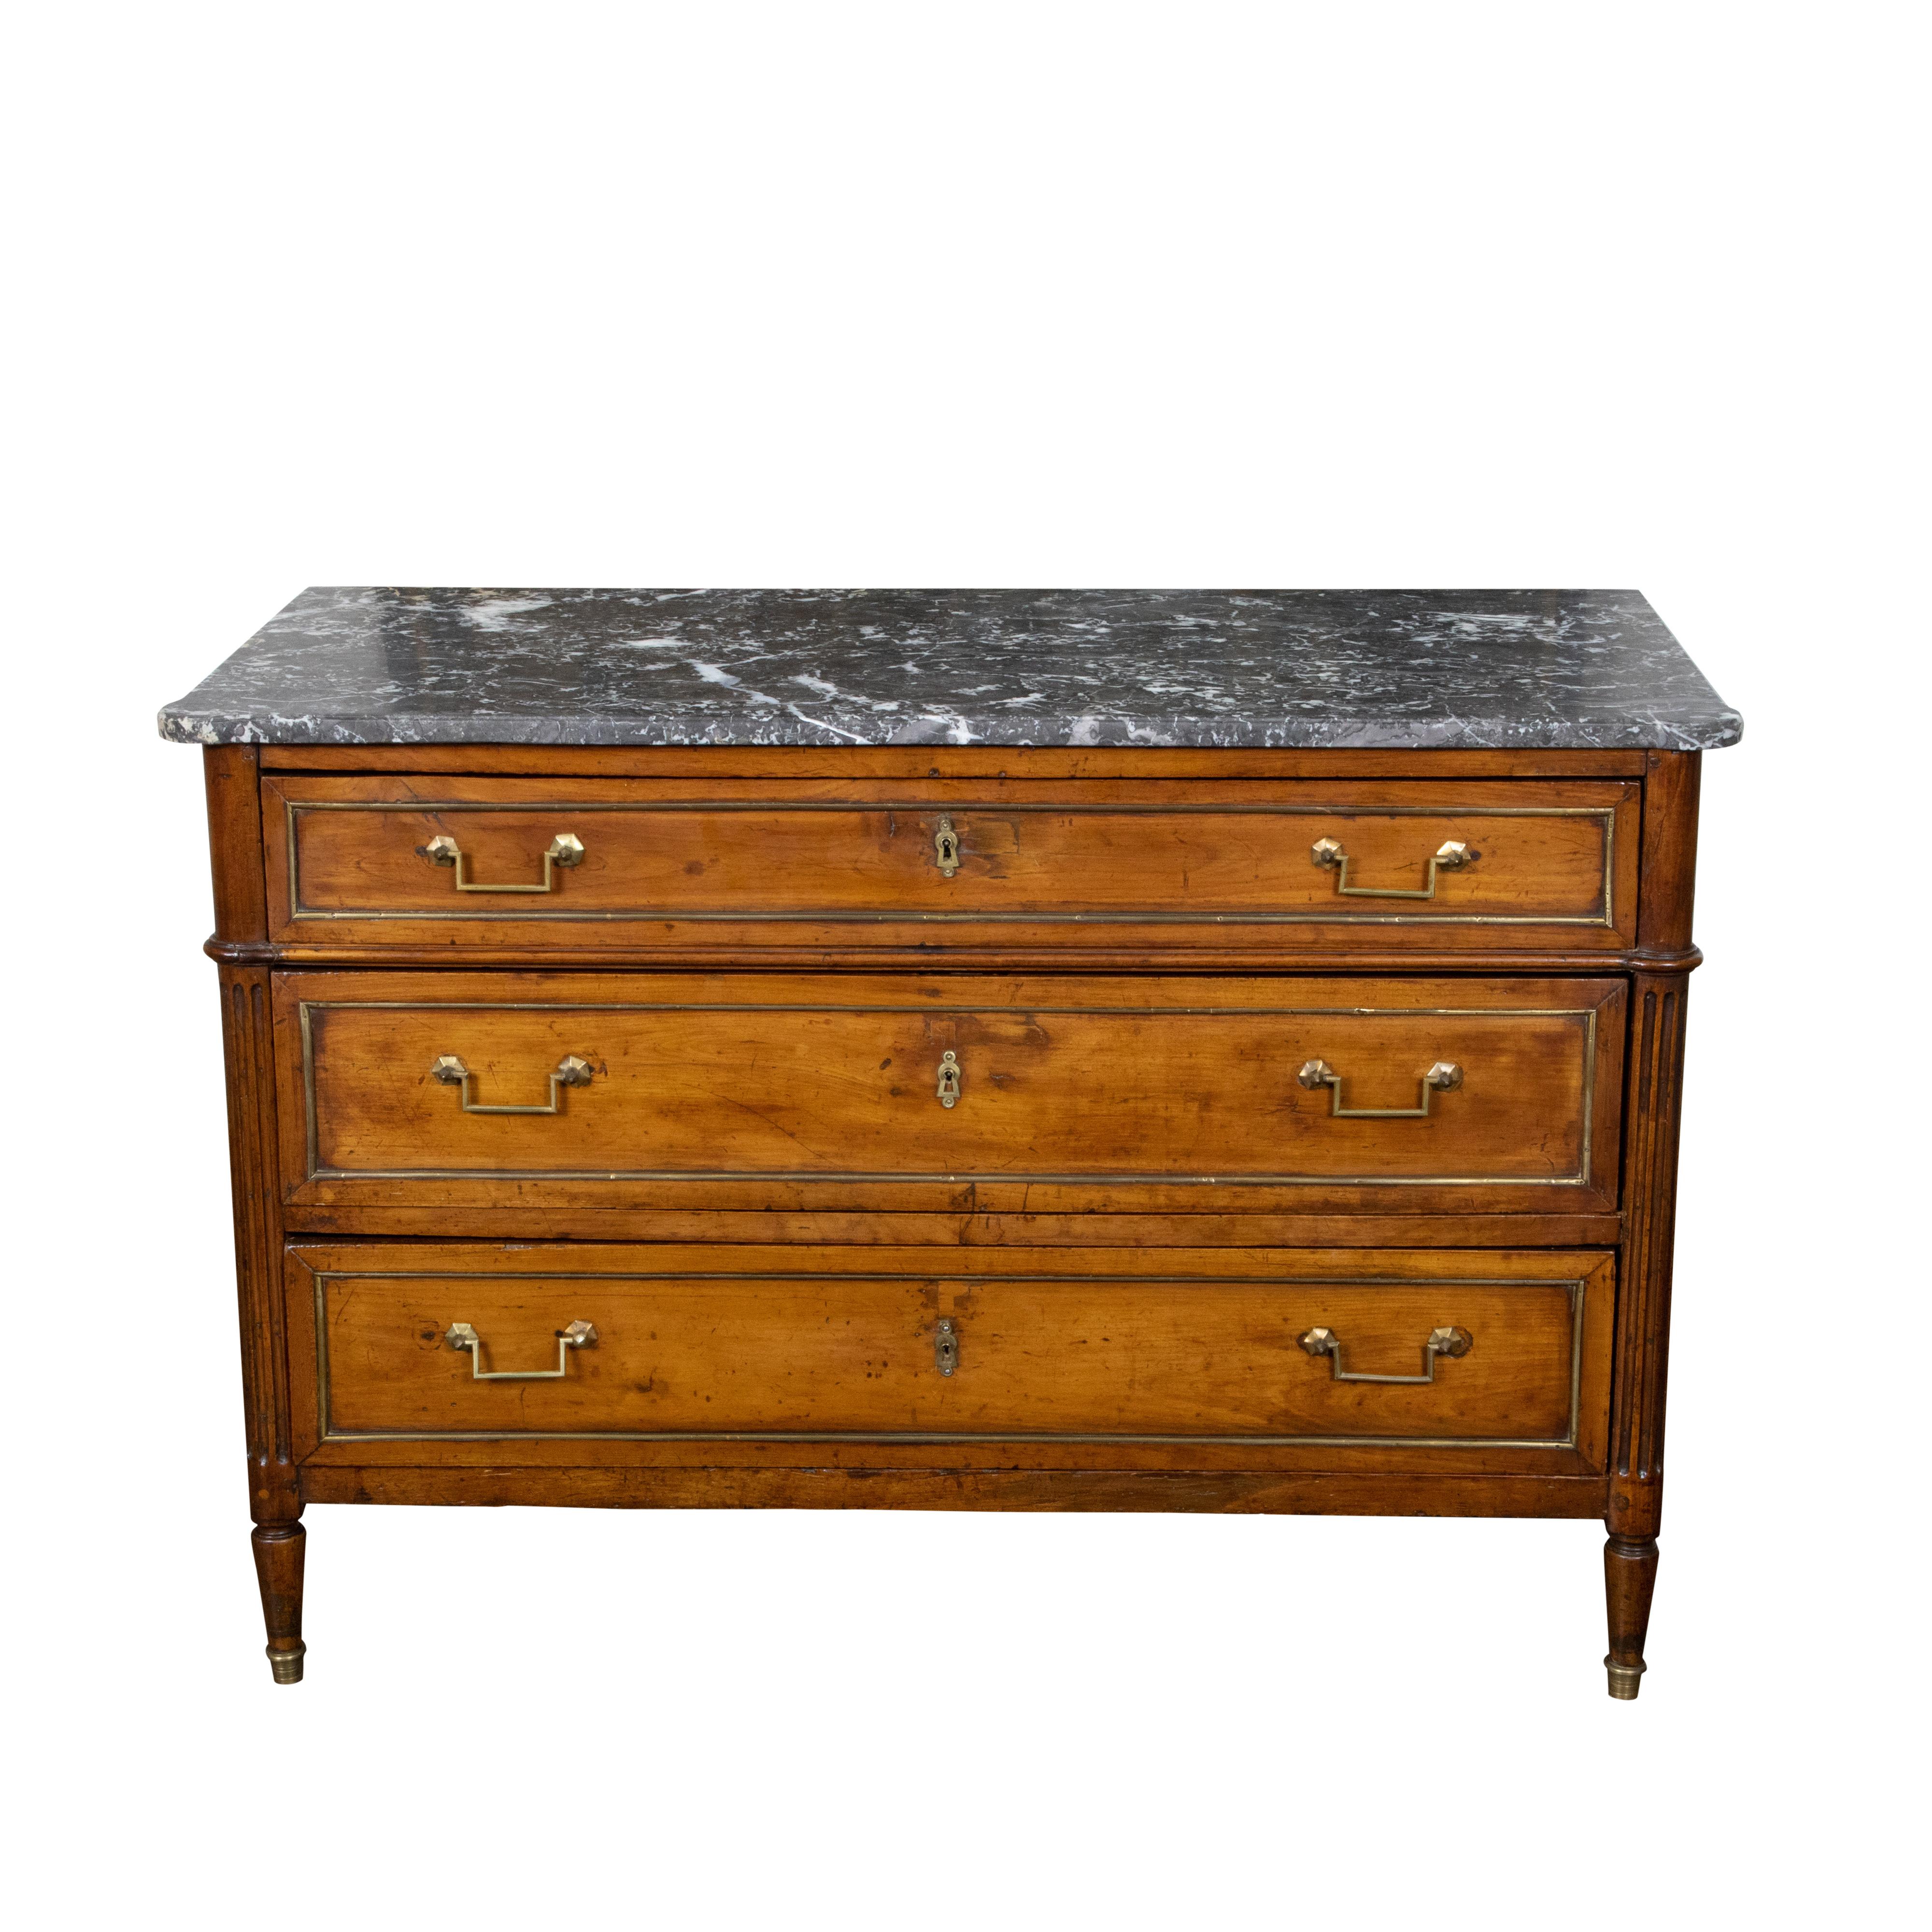 Carved French Directoire Style 19th Century Walnut Commode with Grey Marble Top For Sale